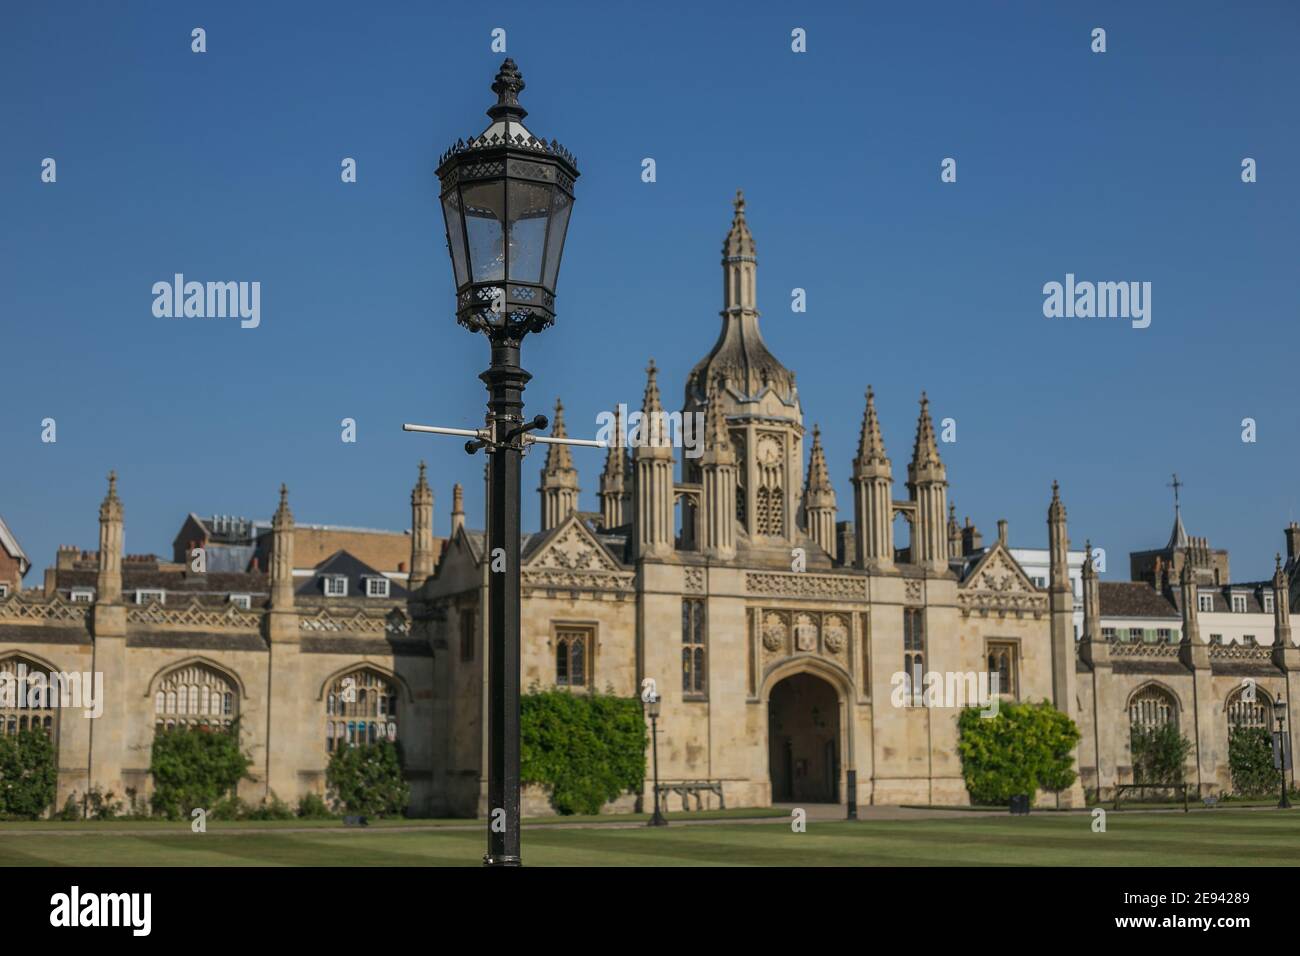 Porters Lodge, entrance to the King's College in Cambridge, England, UK. Stock Photo